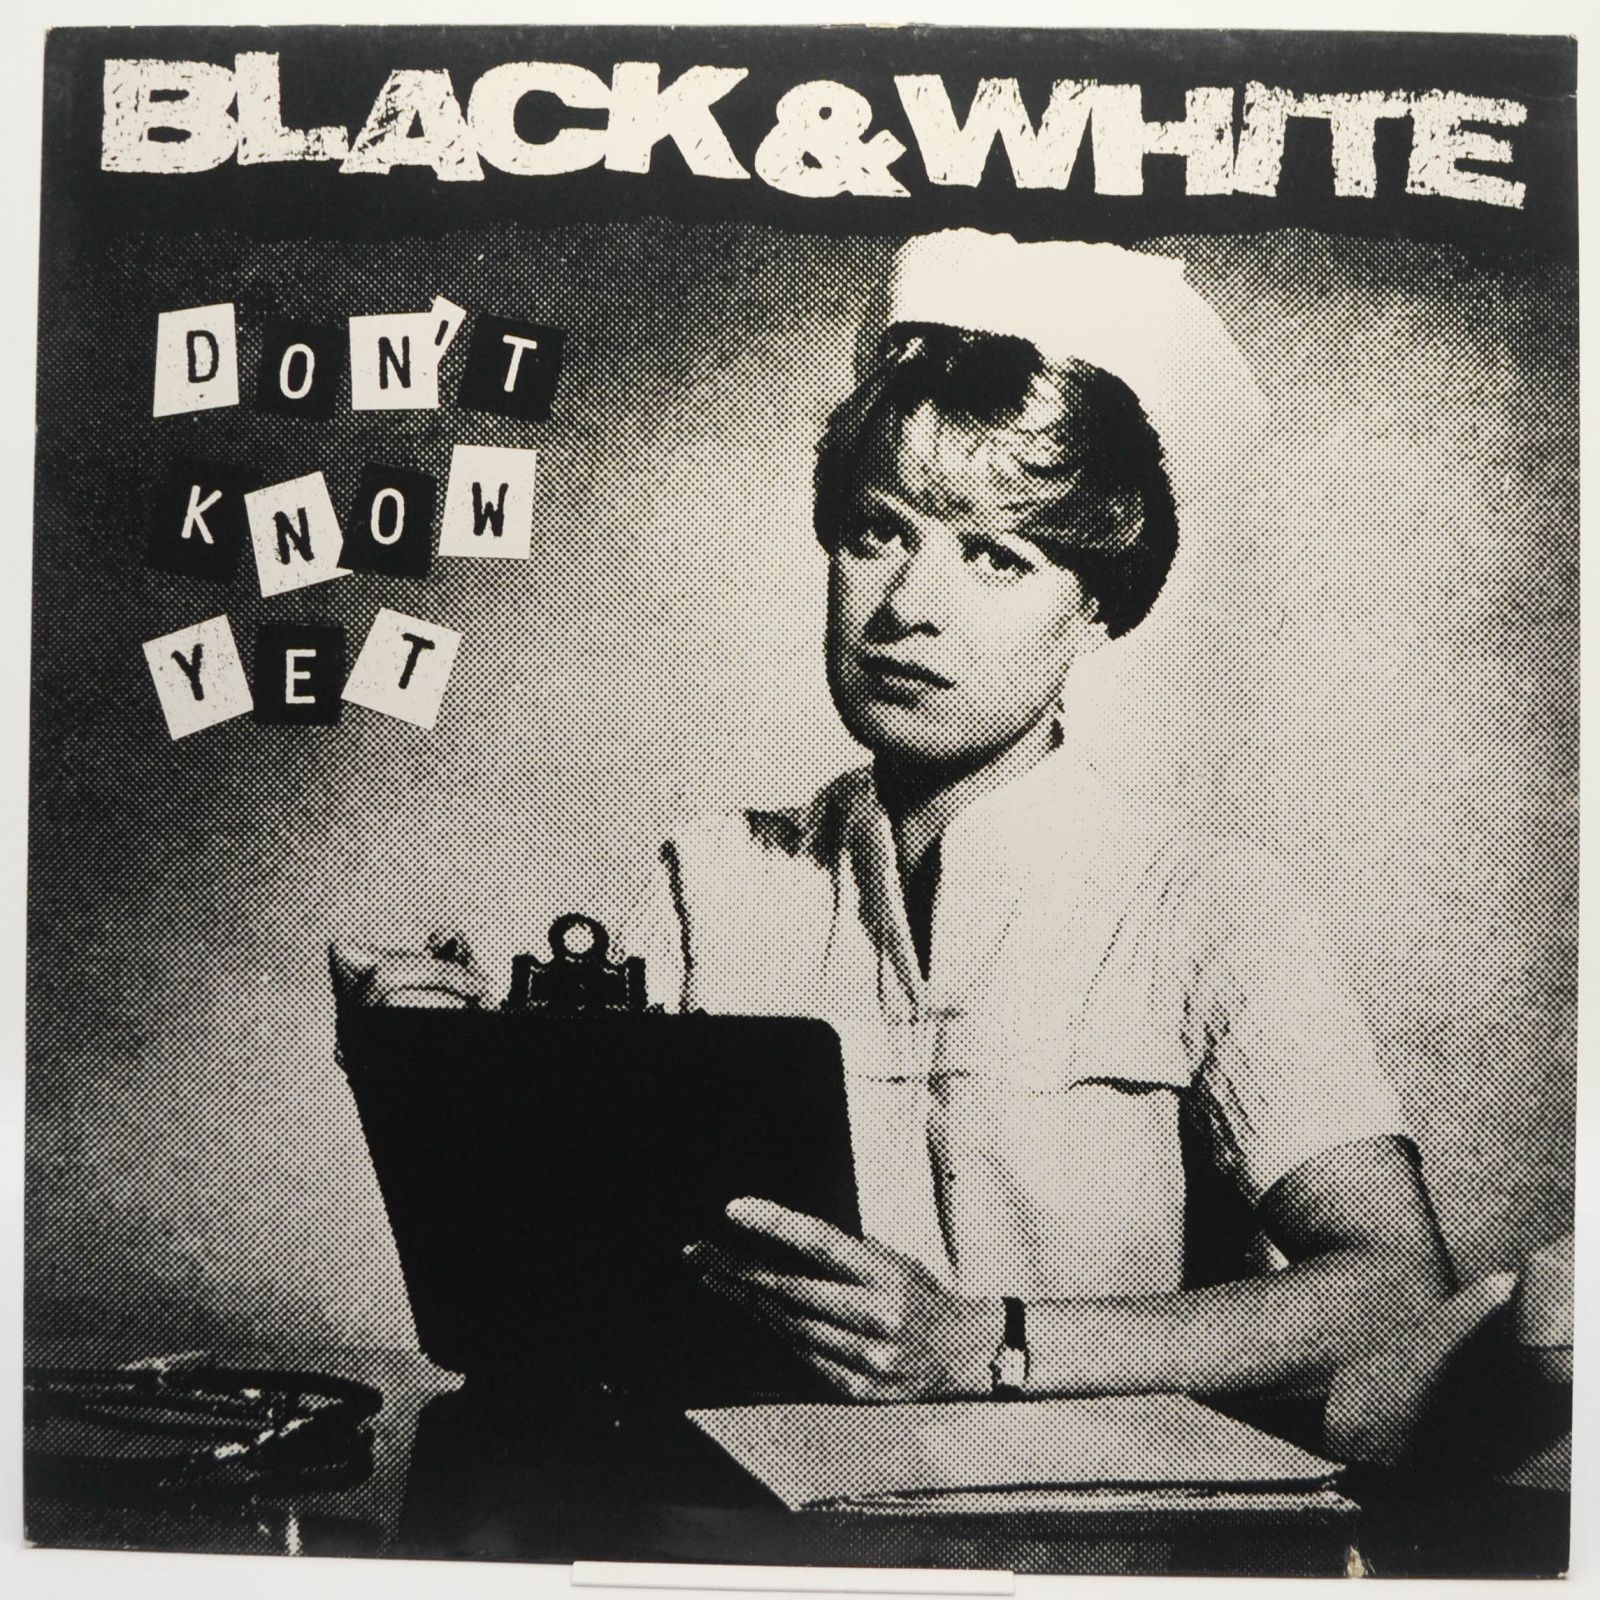 Black & White — Don't Know Yet, 1989